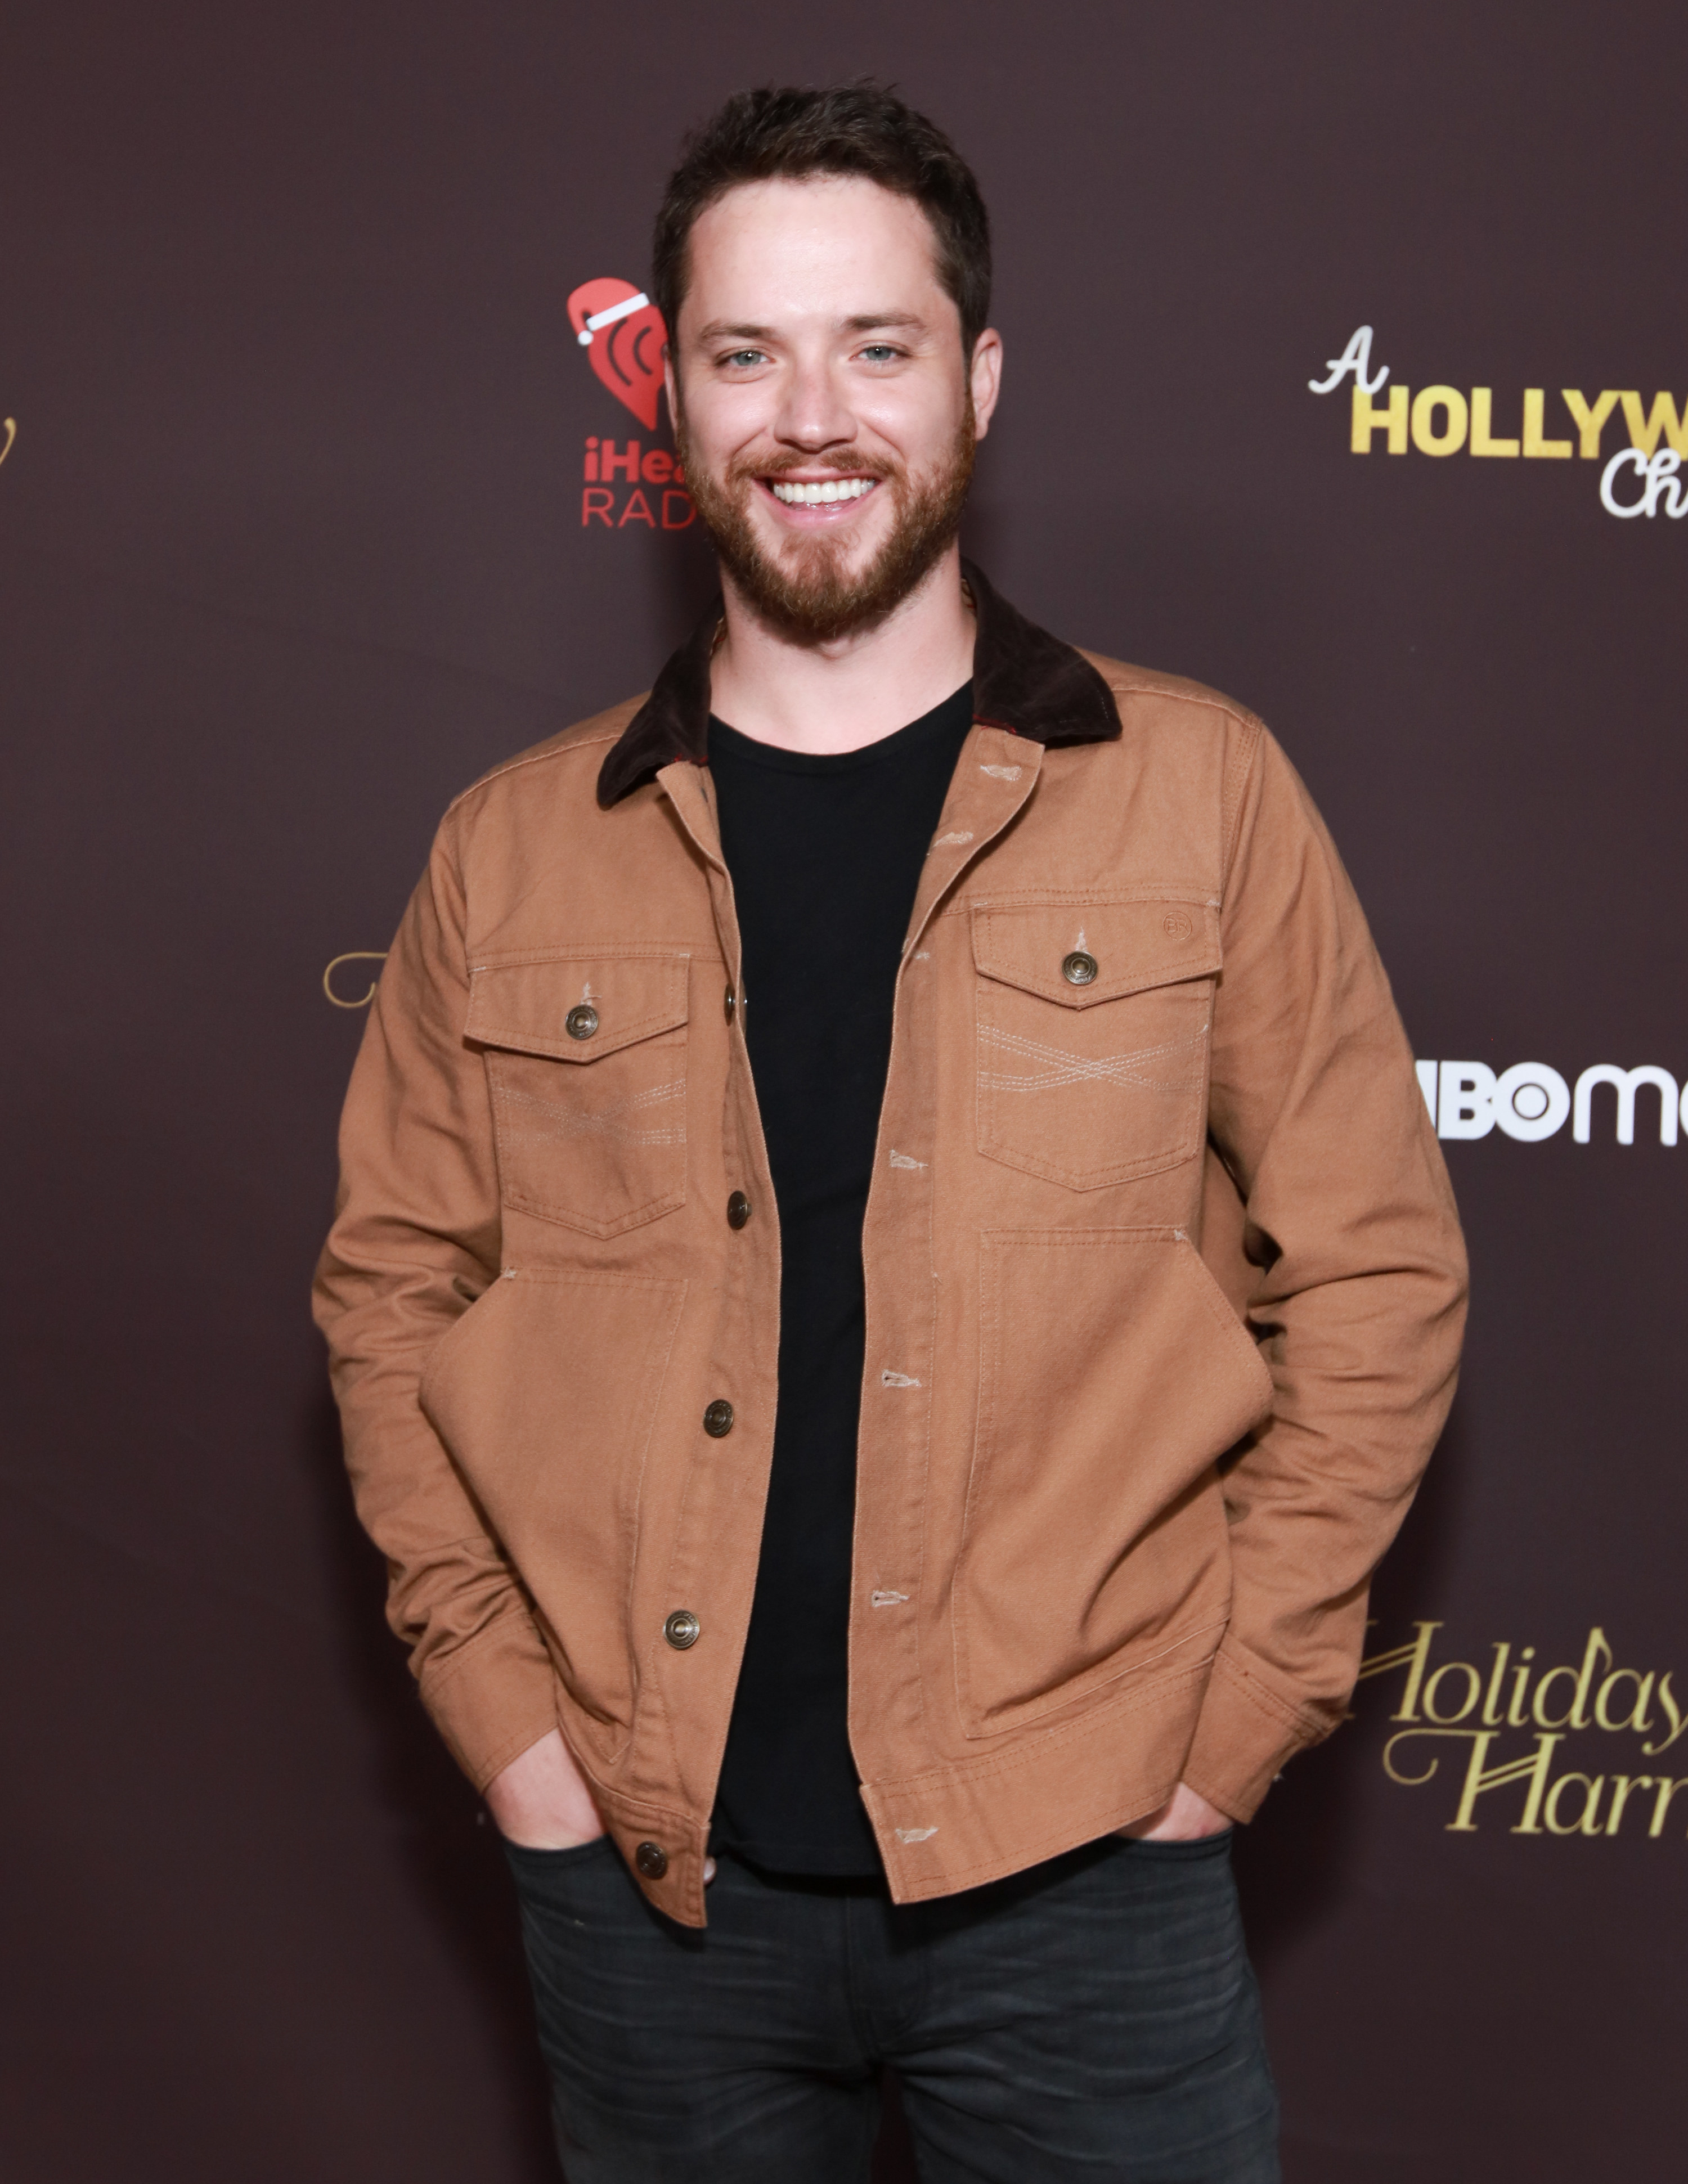 Jeremy Sumpter attends red carpet event